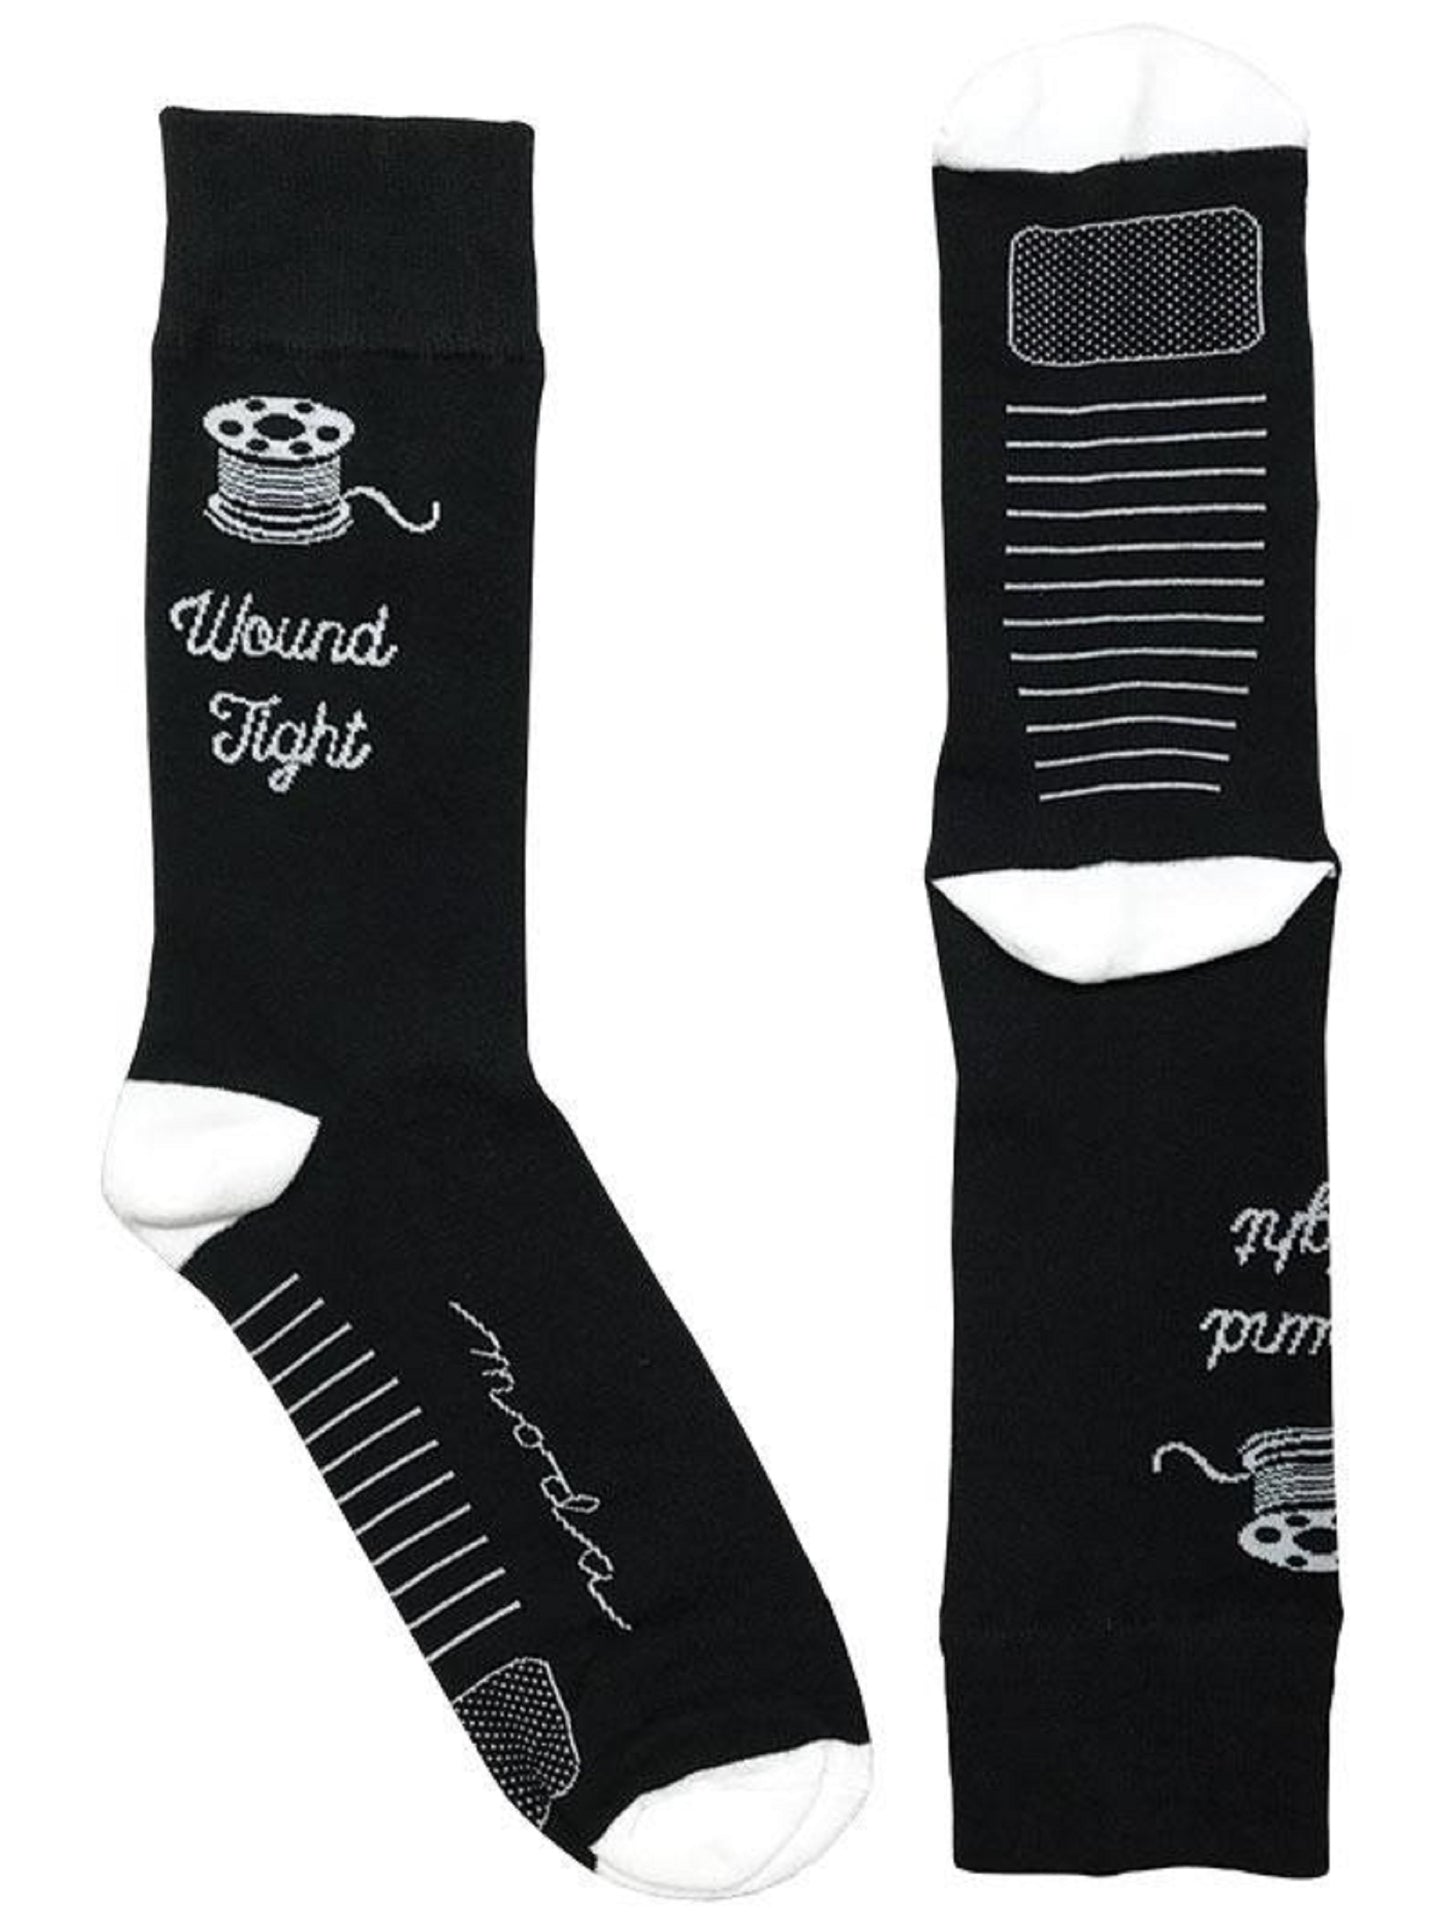 Wound Tight Socks-Moda Fabrics-Black and White-One Size Fits Most